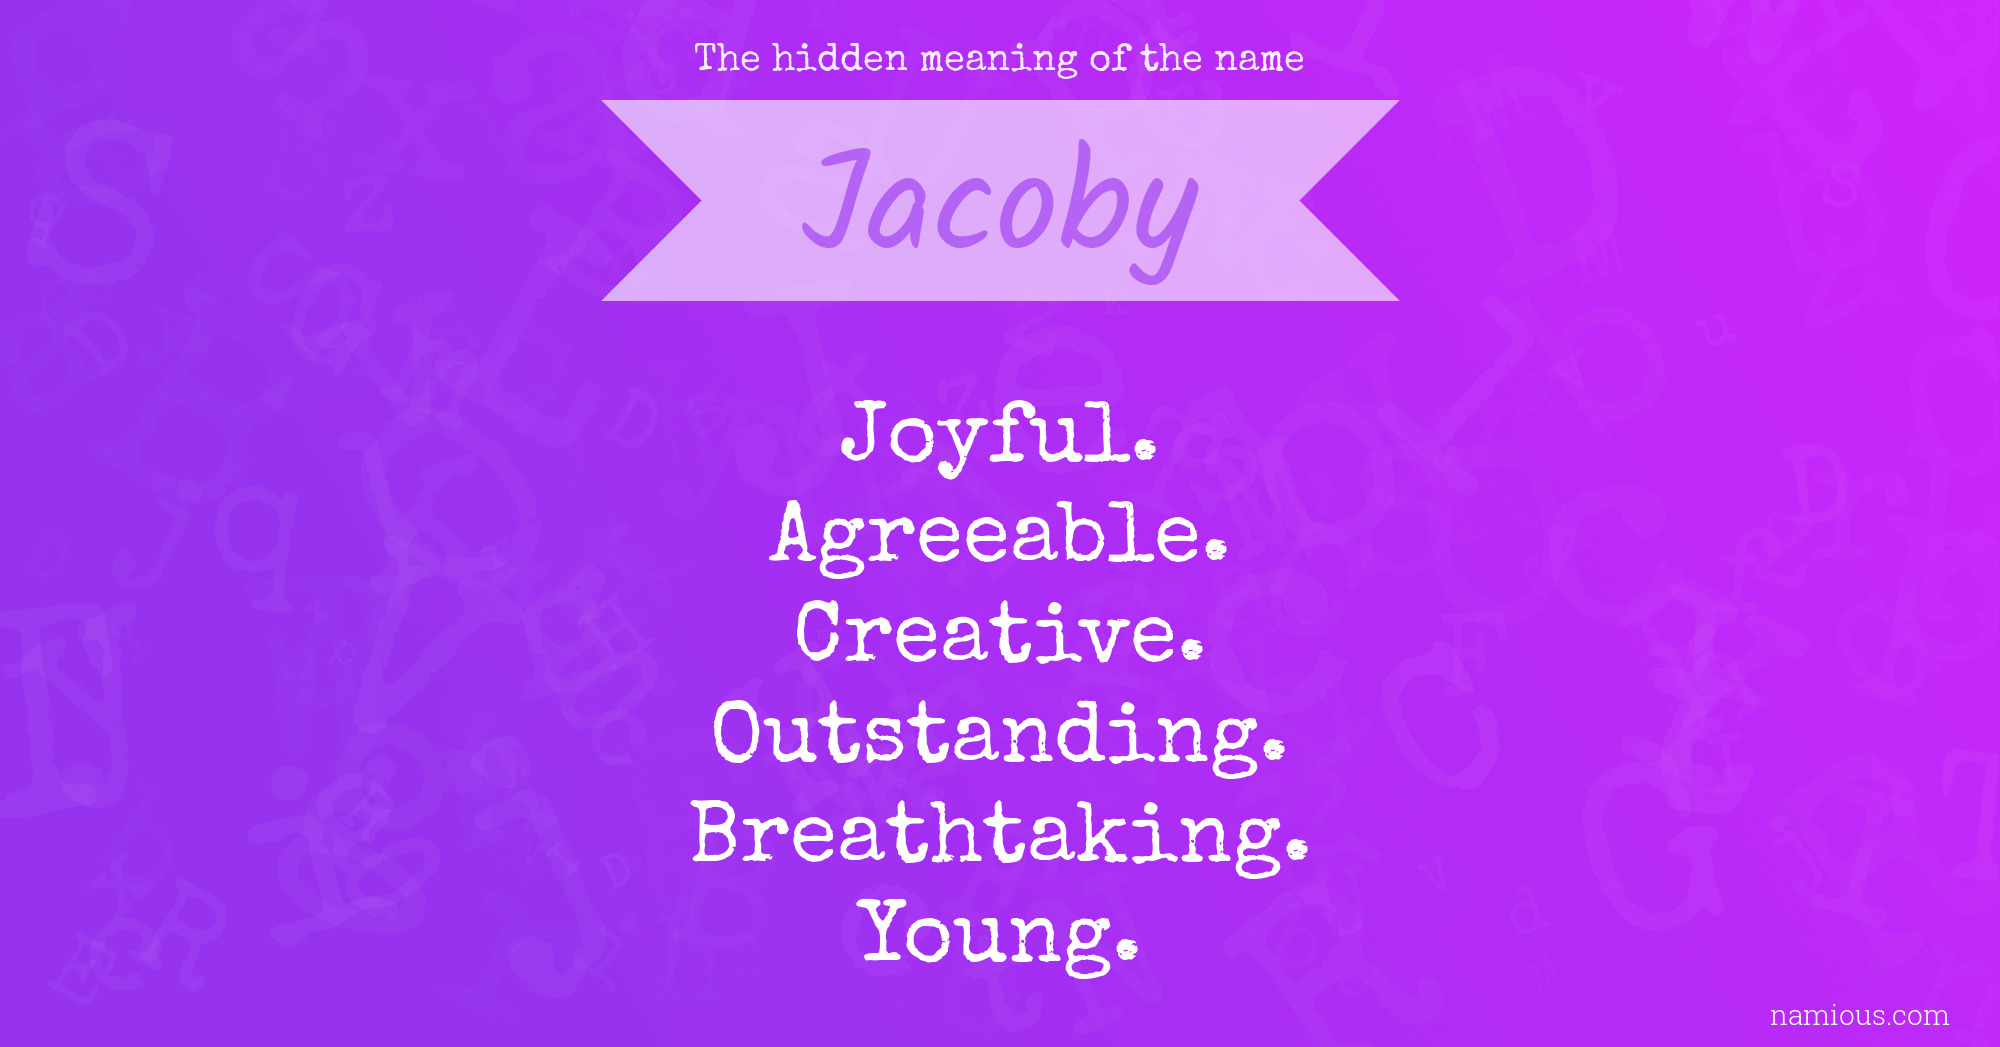 The hidden meaning of the name Jacoby